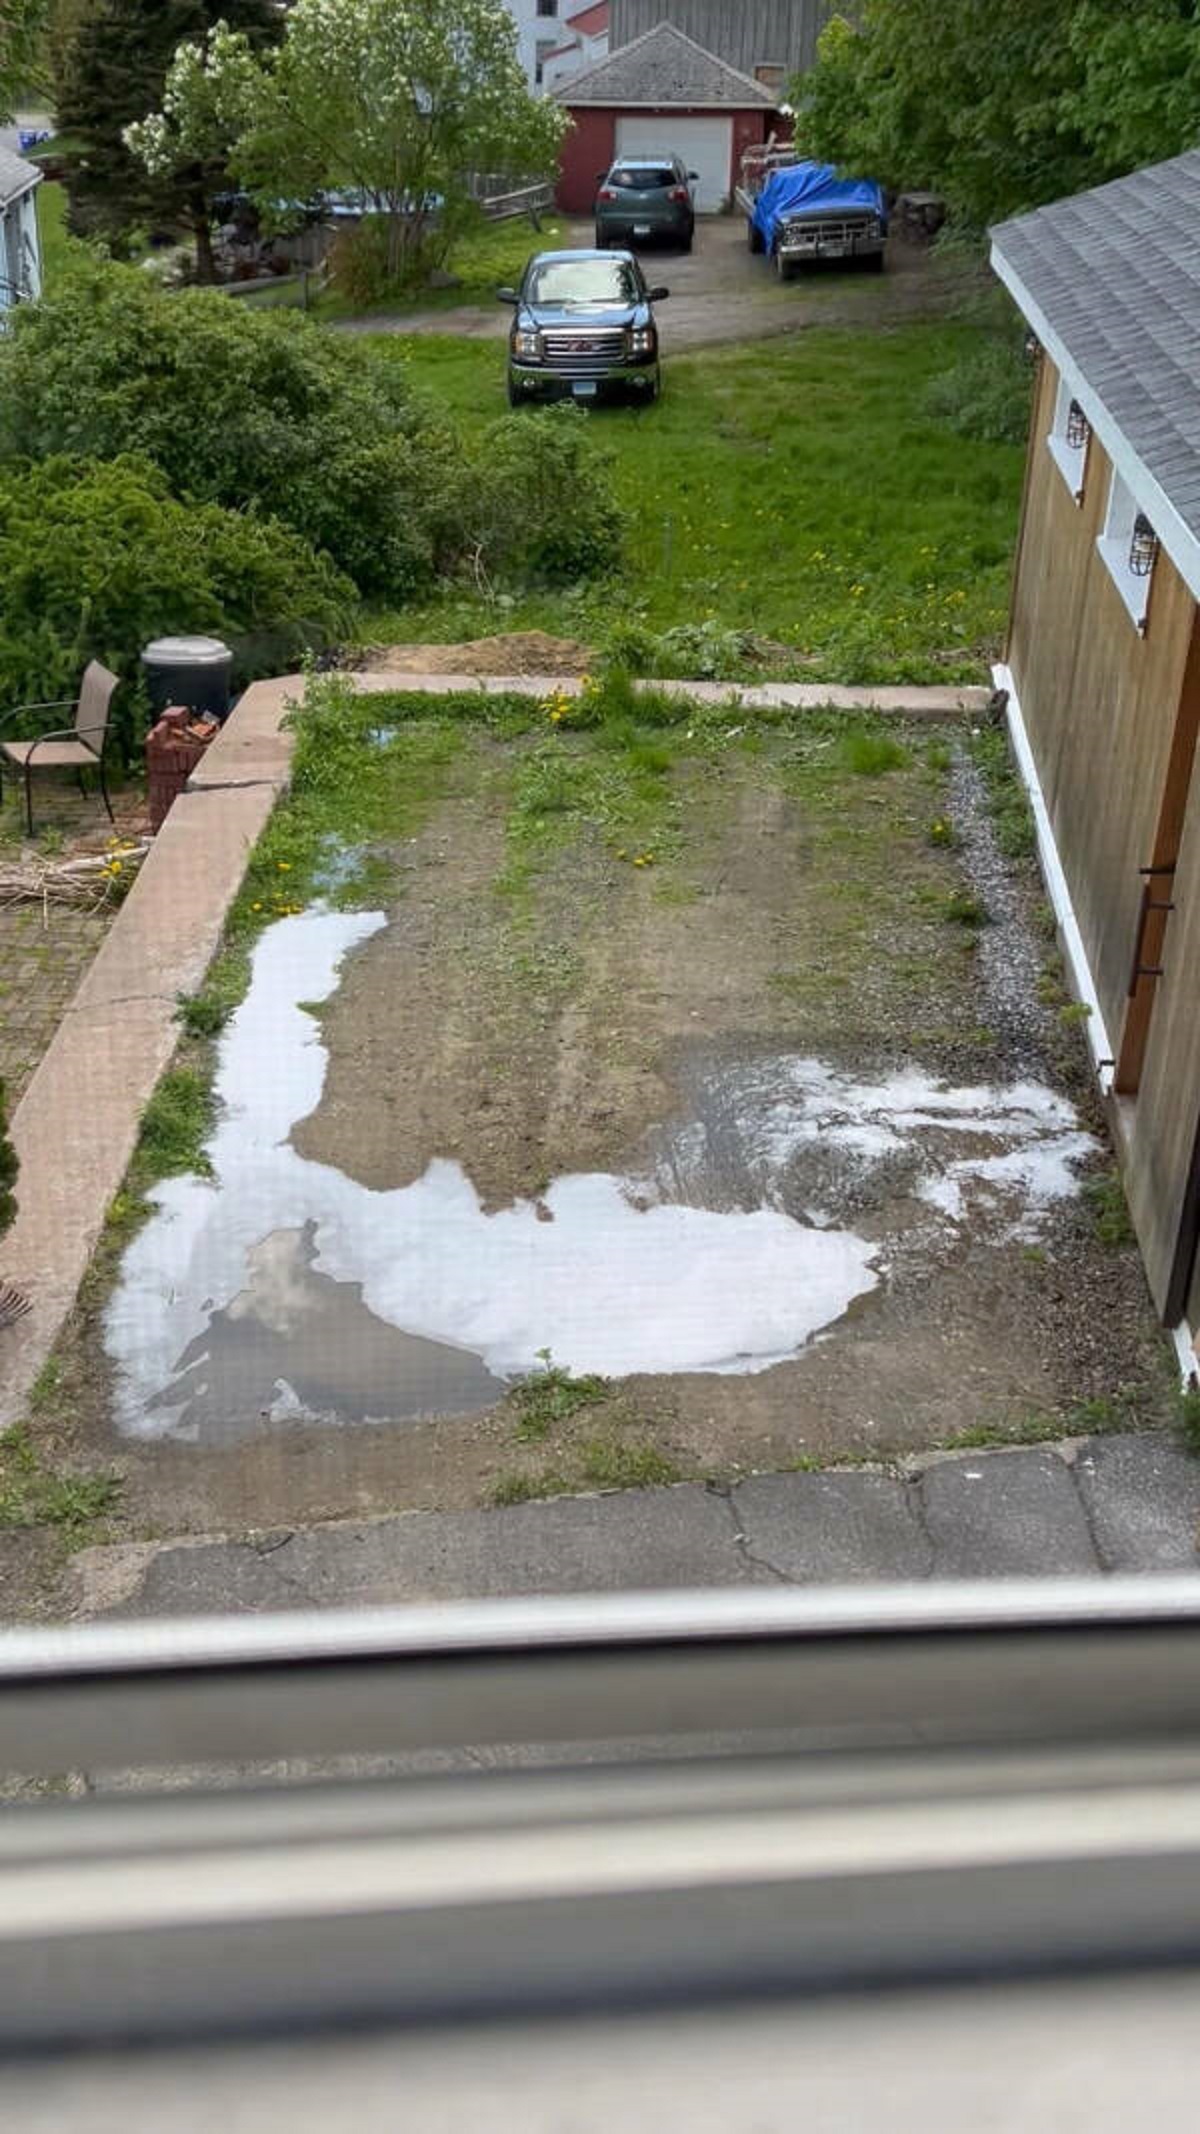 “My landlord decided to set up his washing machine in the garage. That spot is our assigned parking space.”